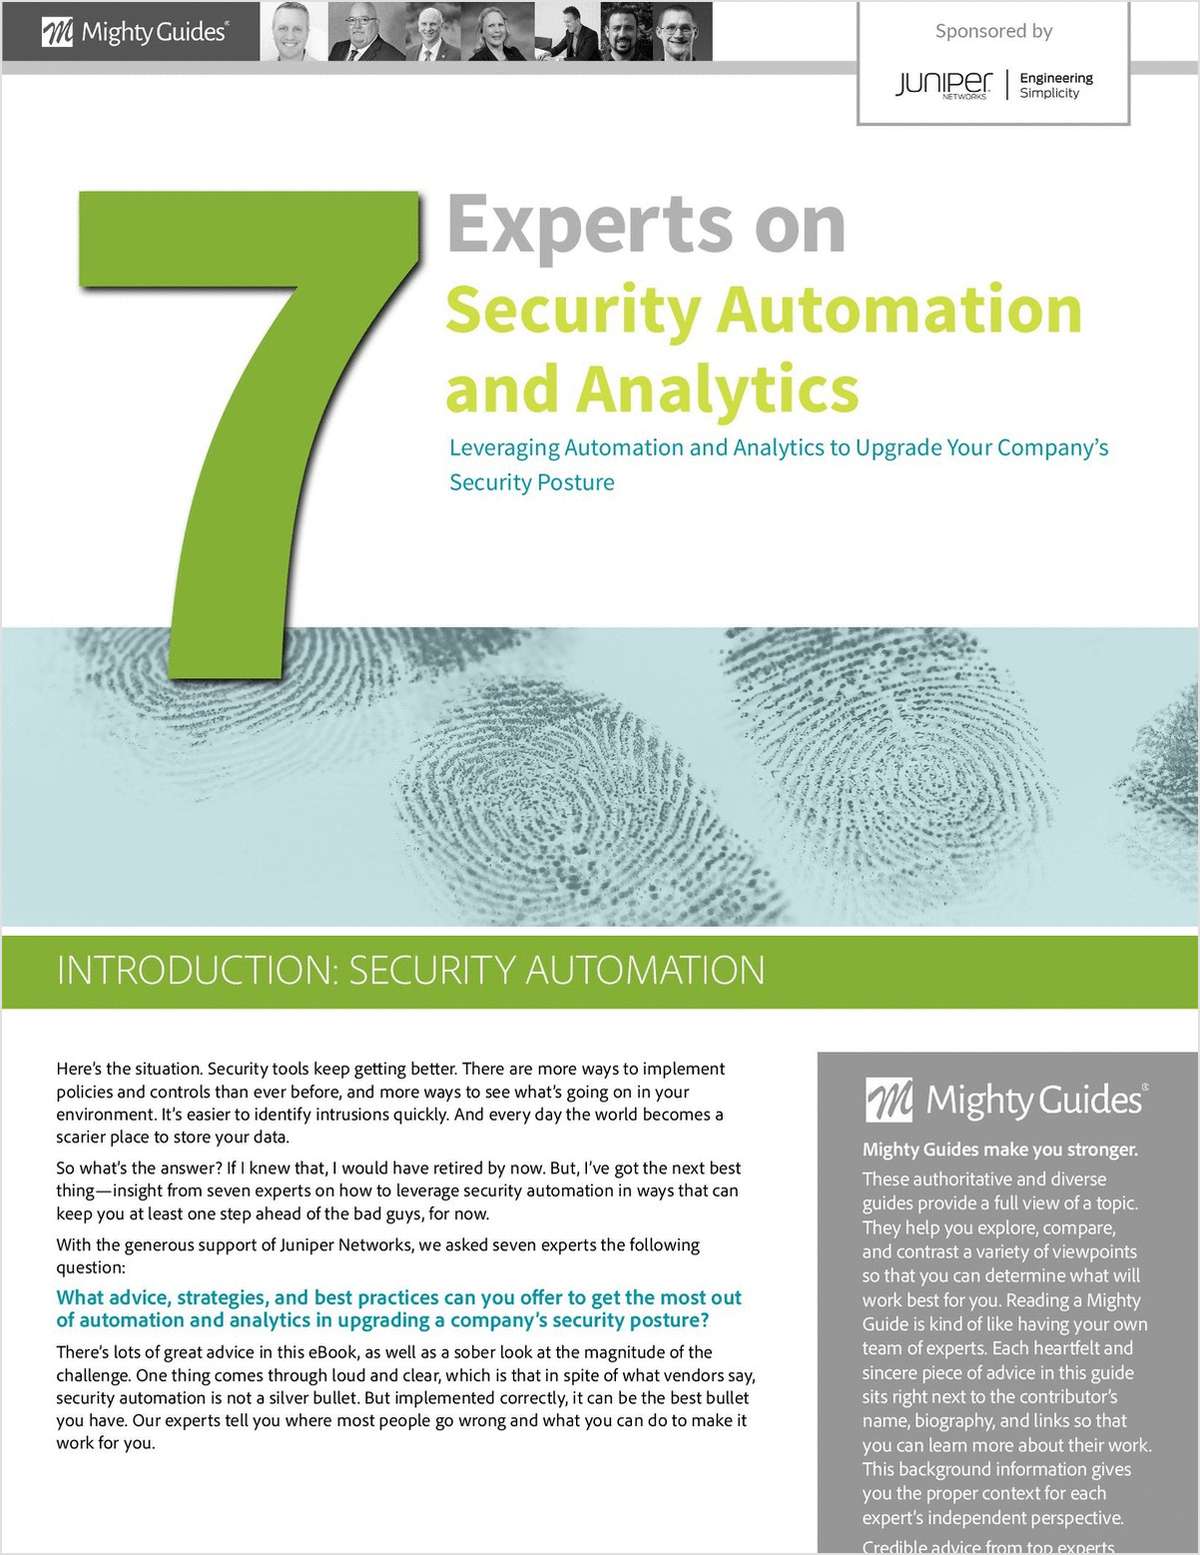 Security Automation & Analytics -- Advice from 7 Cybersecurity Experts [ASEAN Edition]